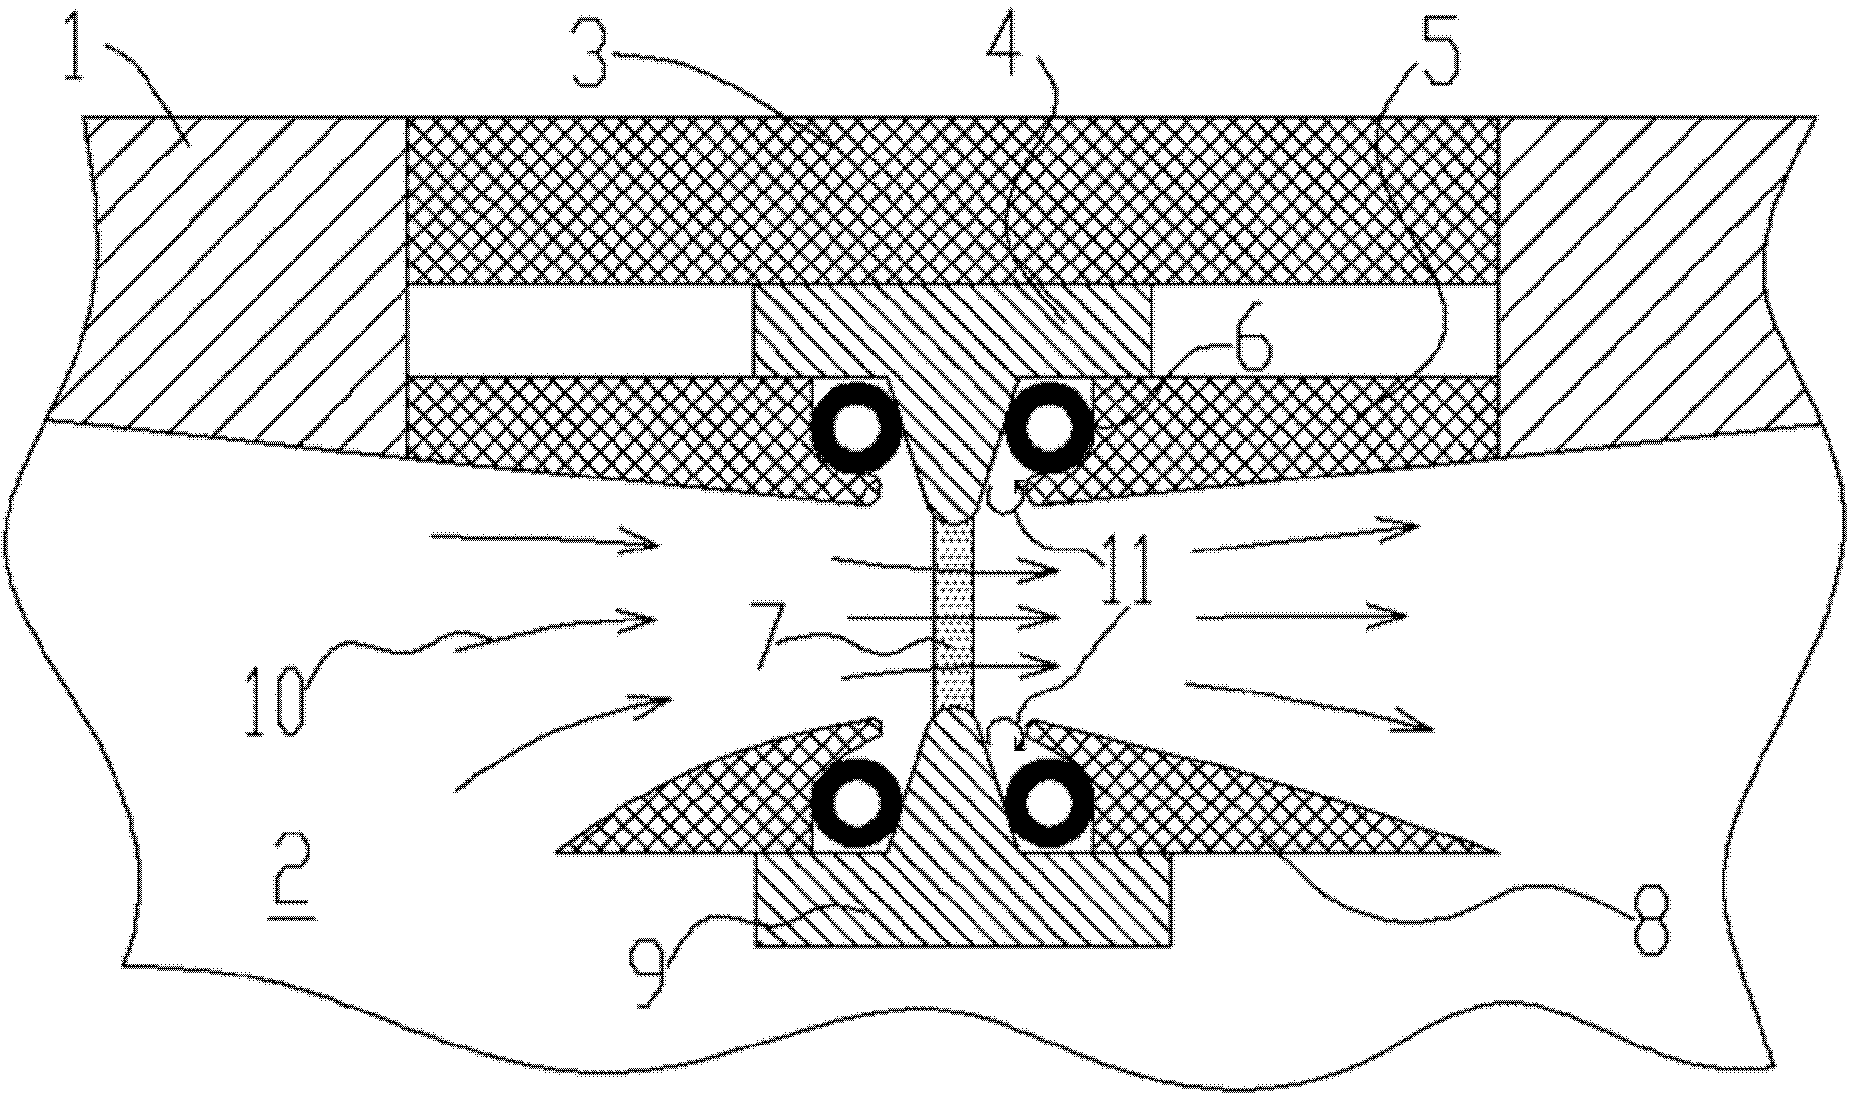 Discharging chamber with micro-channel structure and gas laser device